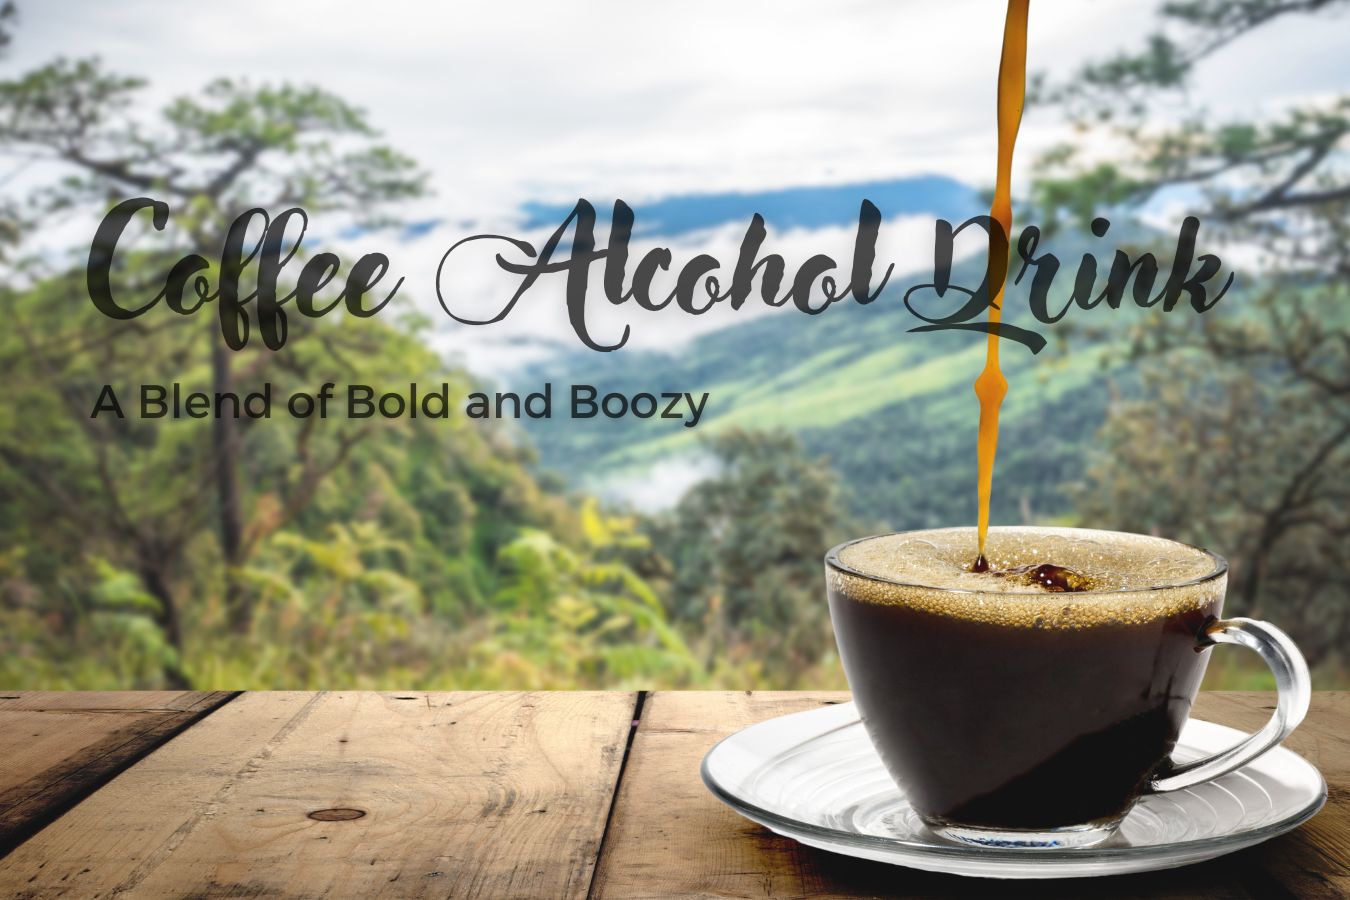 Coffee Alcohol Drinks A Blend of Bold and Boozy